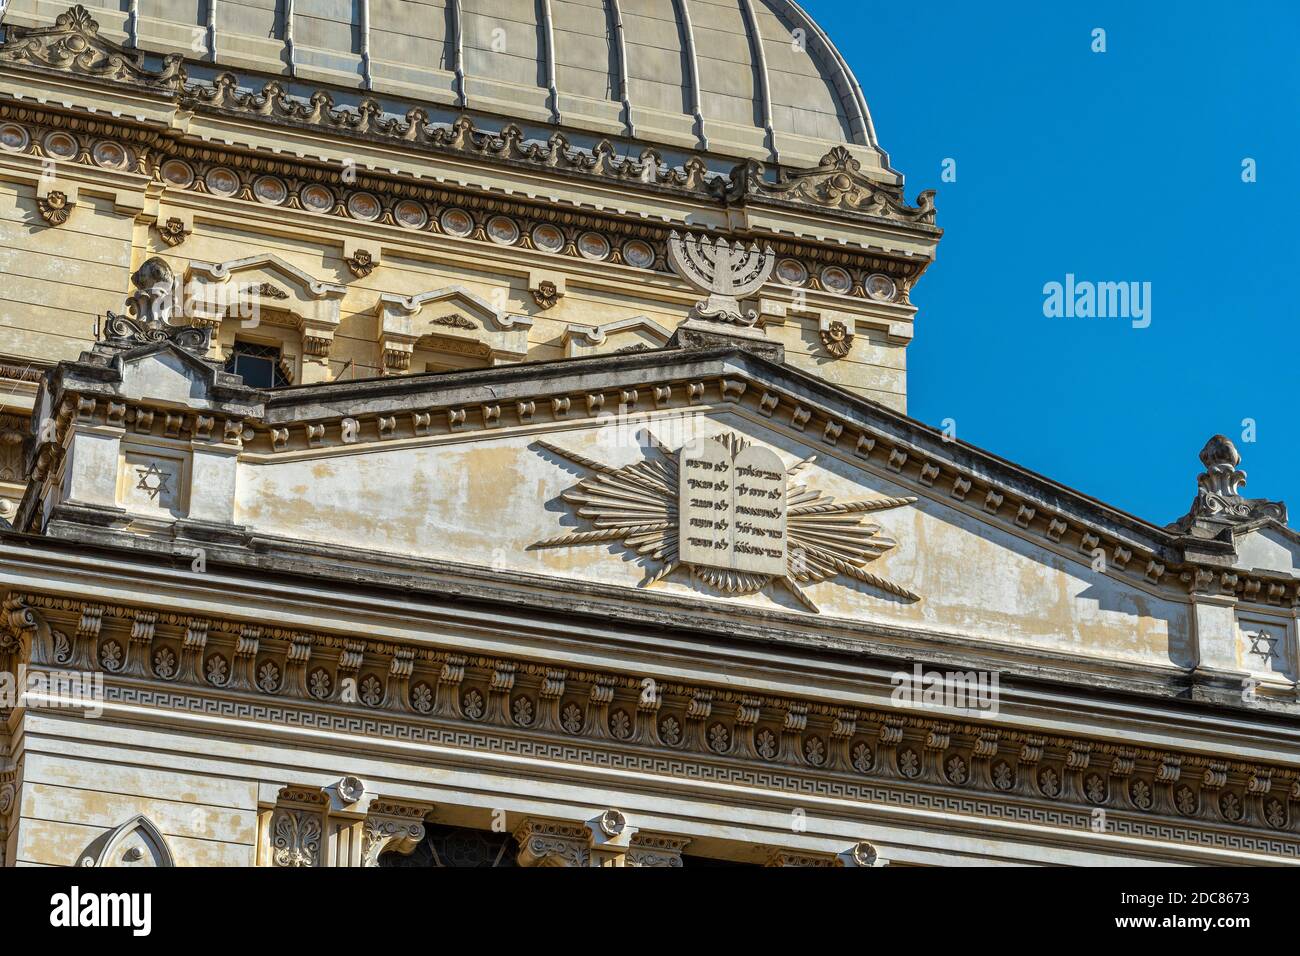 detail of the facade of the Great temple of Rome.IT  is the synagogue in Rome in the Jewish ghetto. Rome, Lazio, Italy, Europe Stock Photo